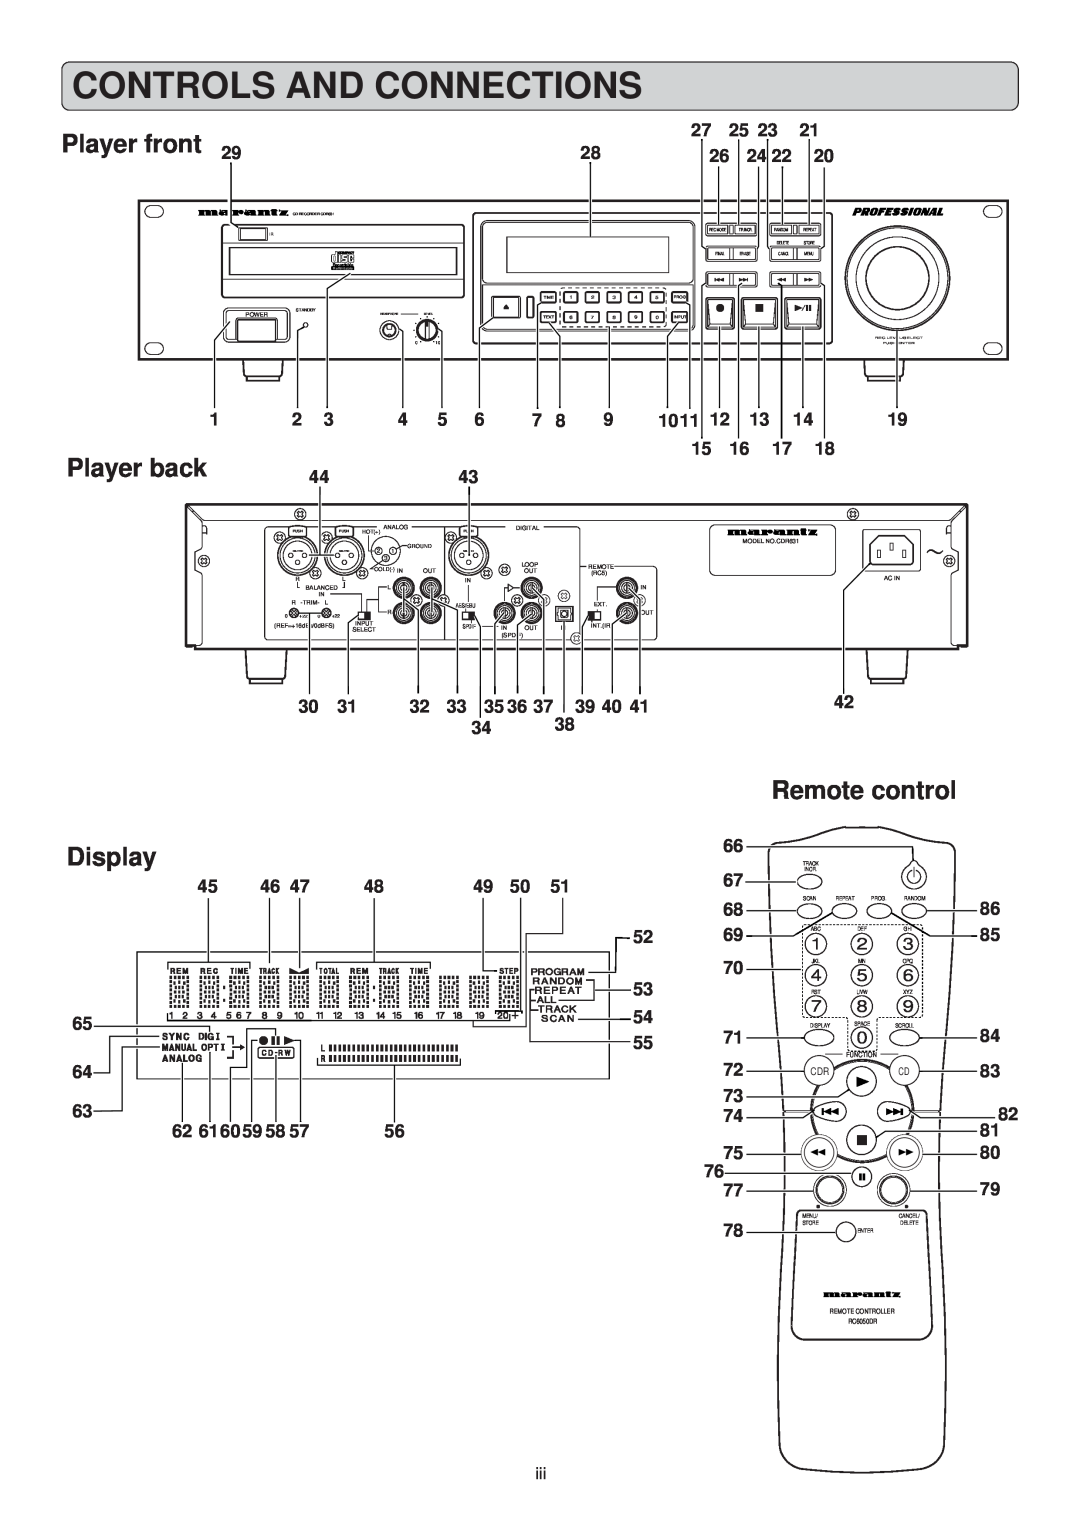 Marantz CDR631 manual Controls And Connections, 1011, 62 6160 59, Player front, Player back, Remote control, Display 